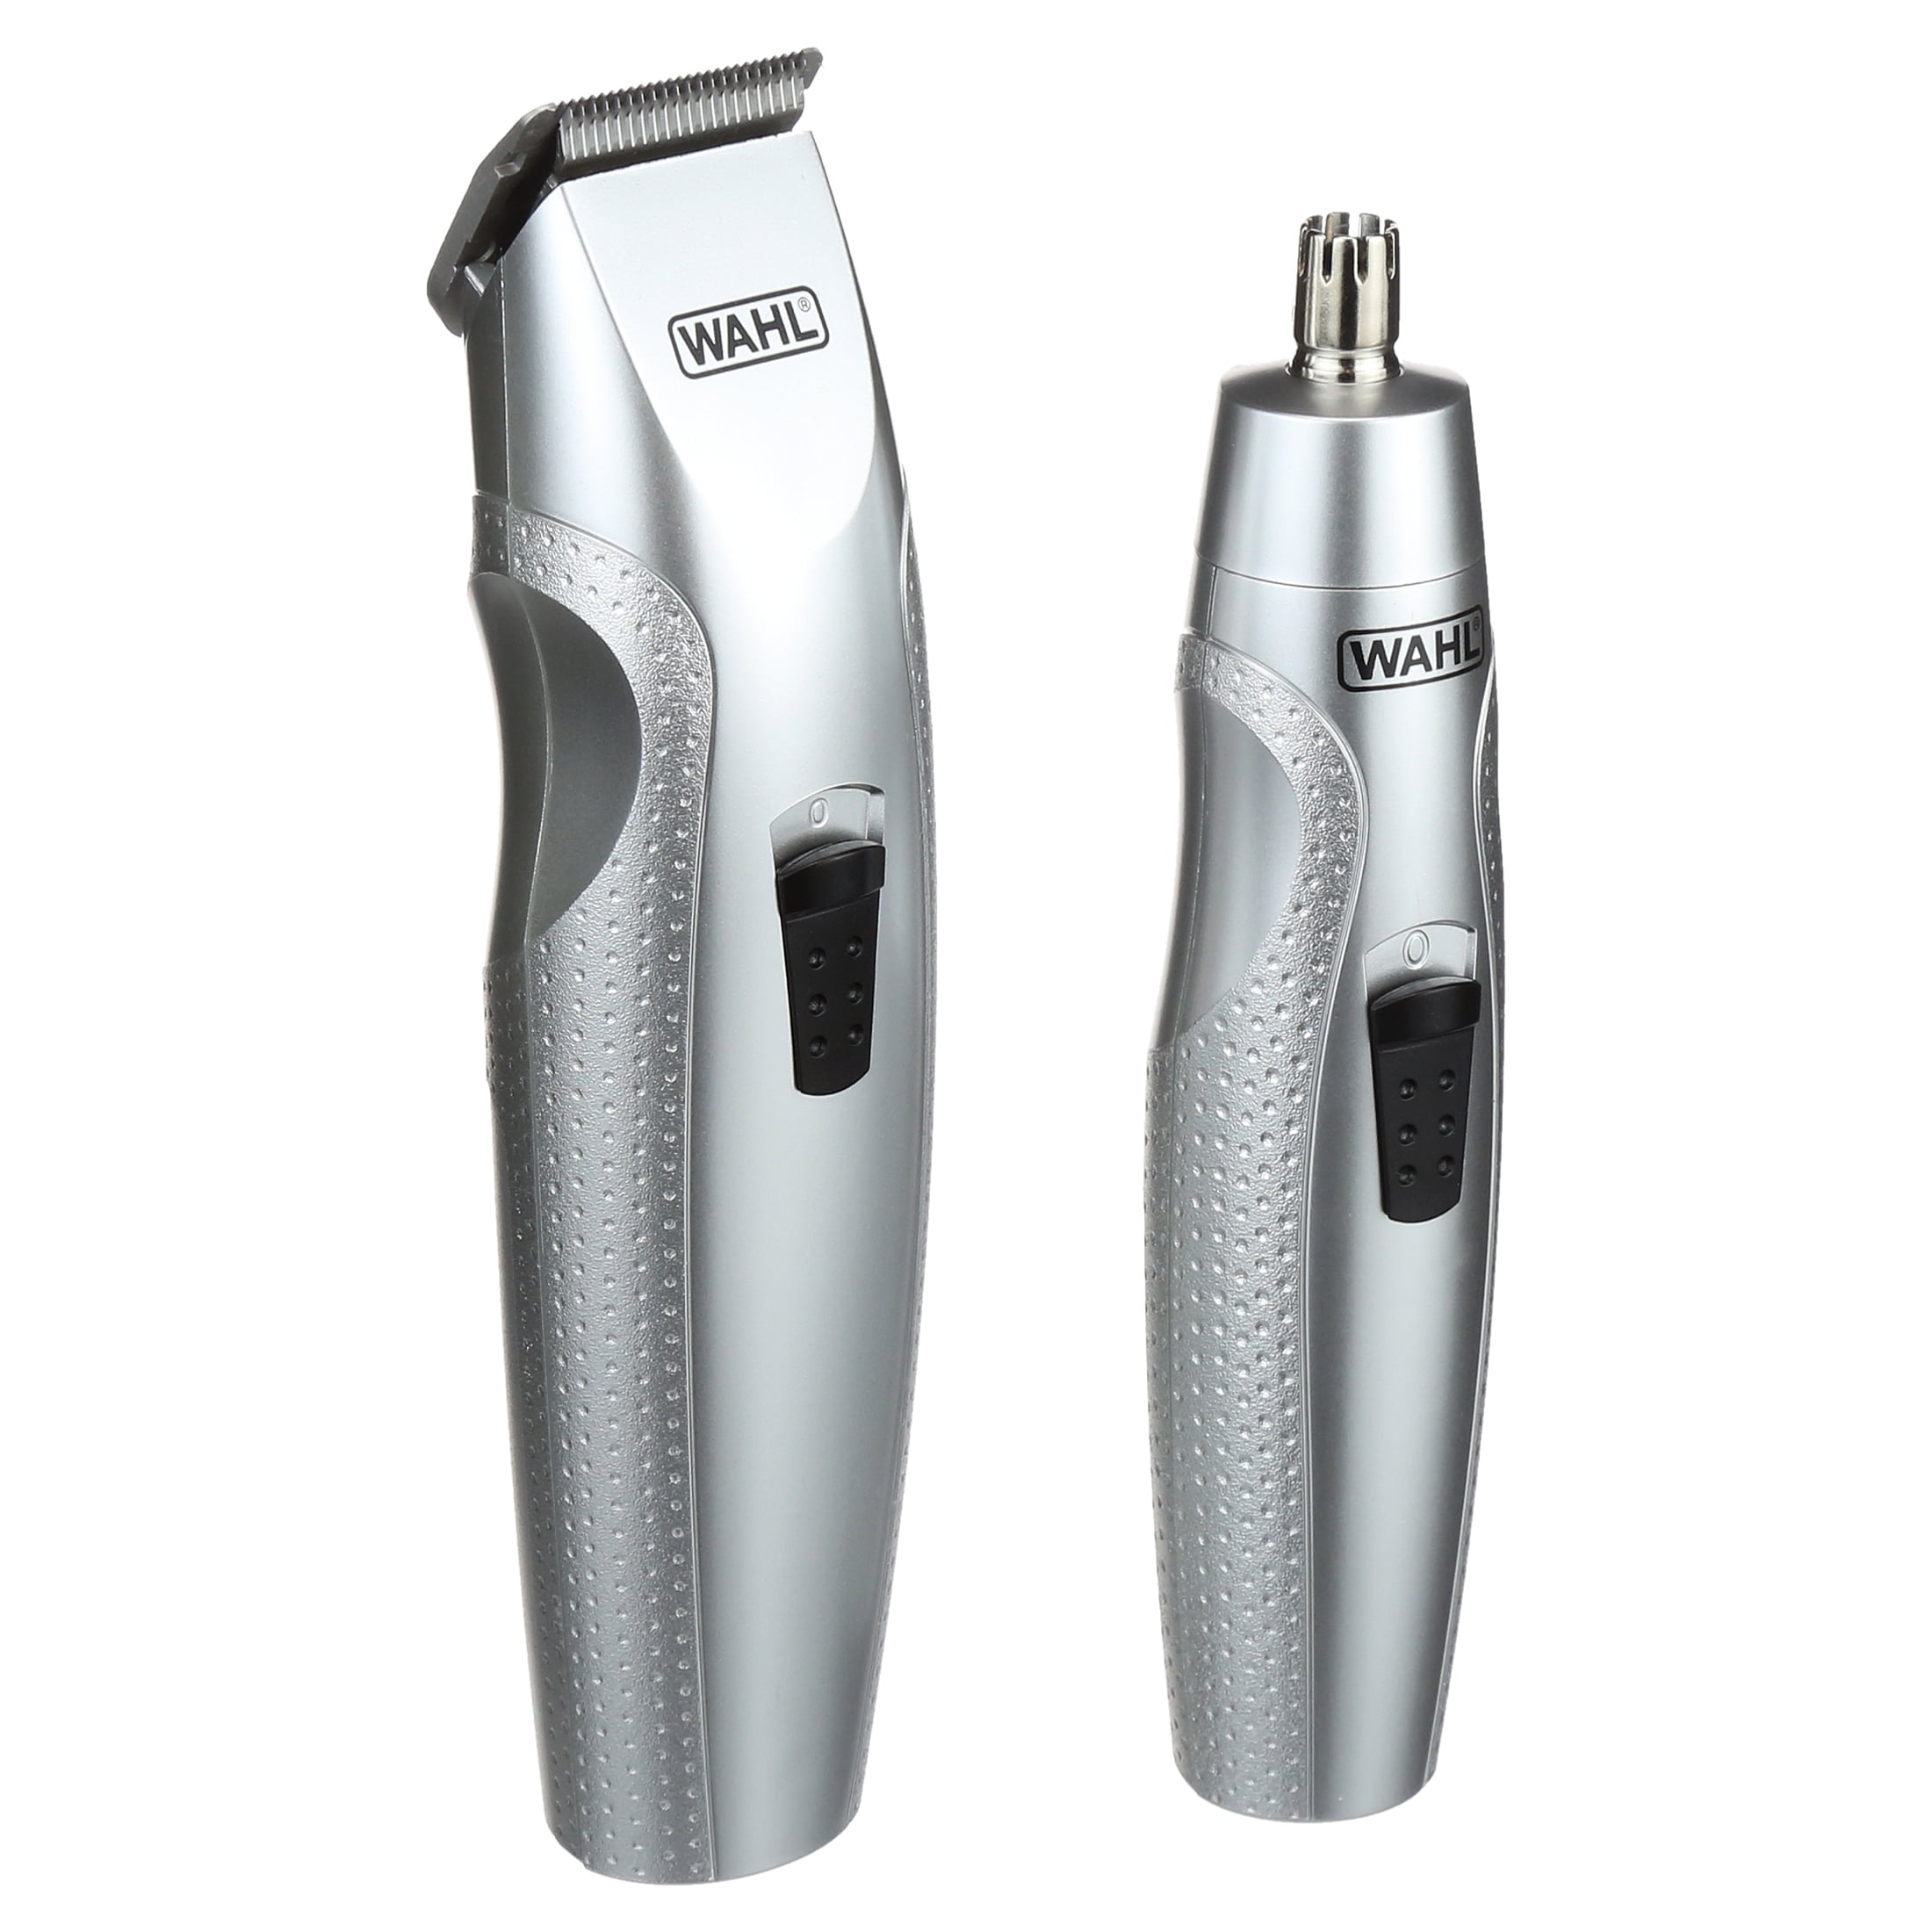 Wahl 9916-4301 Beard and Mustache Trimmer, Cordless Rechargeable Facial Hair Trimmer with Length Settings